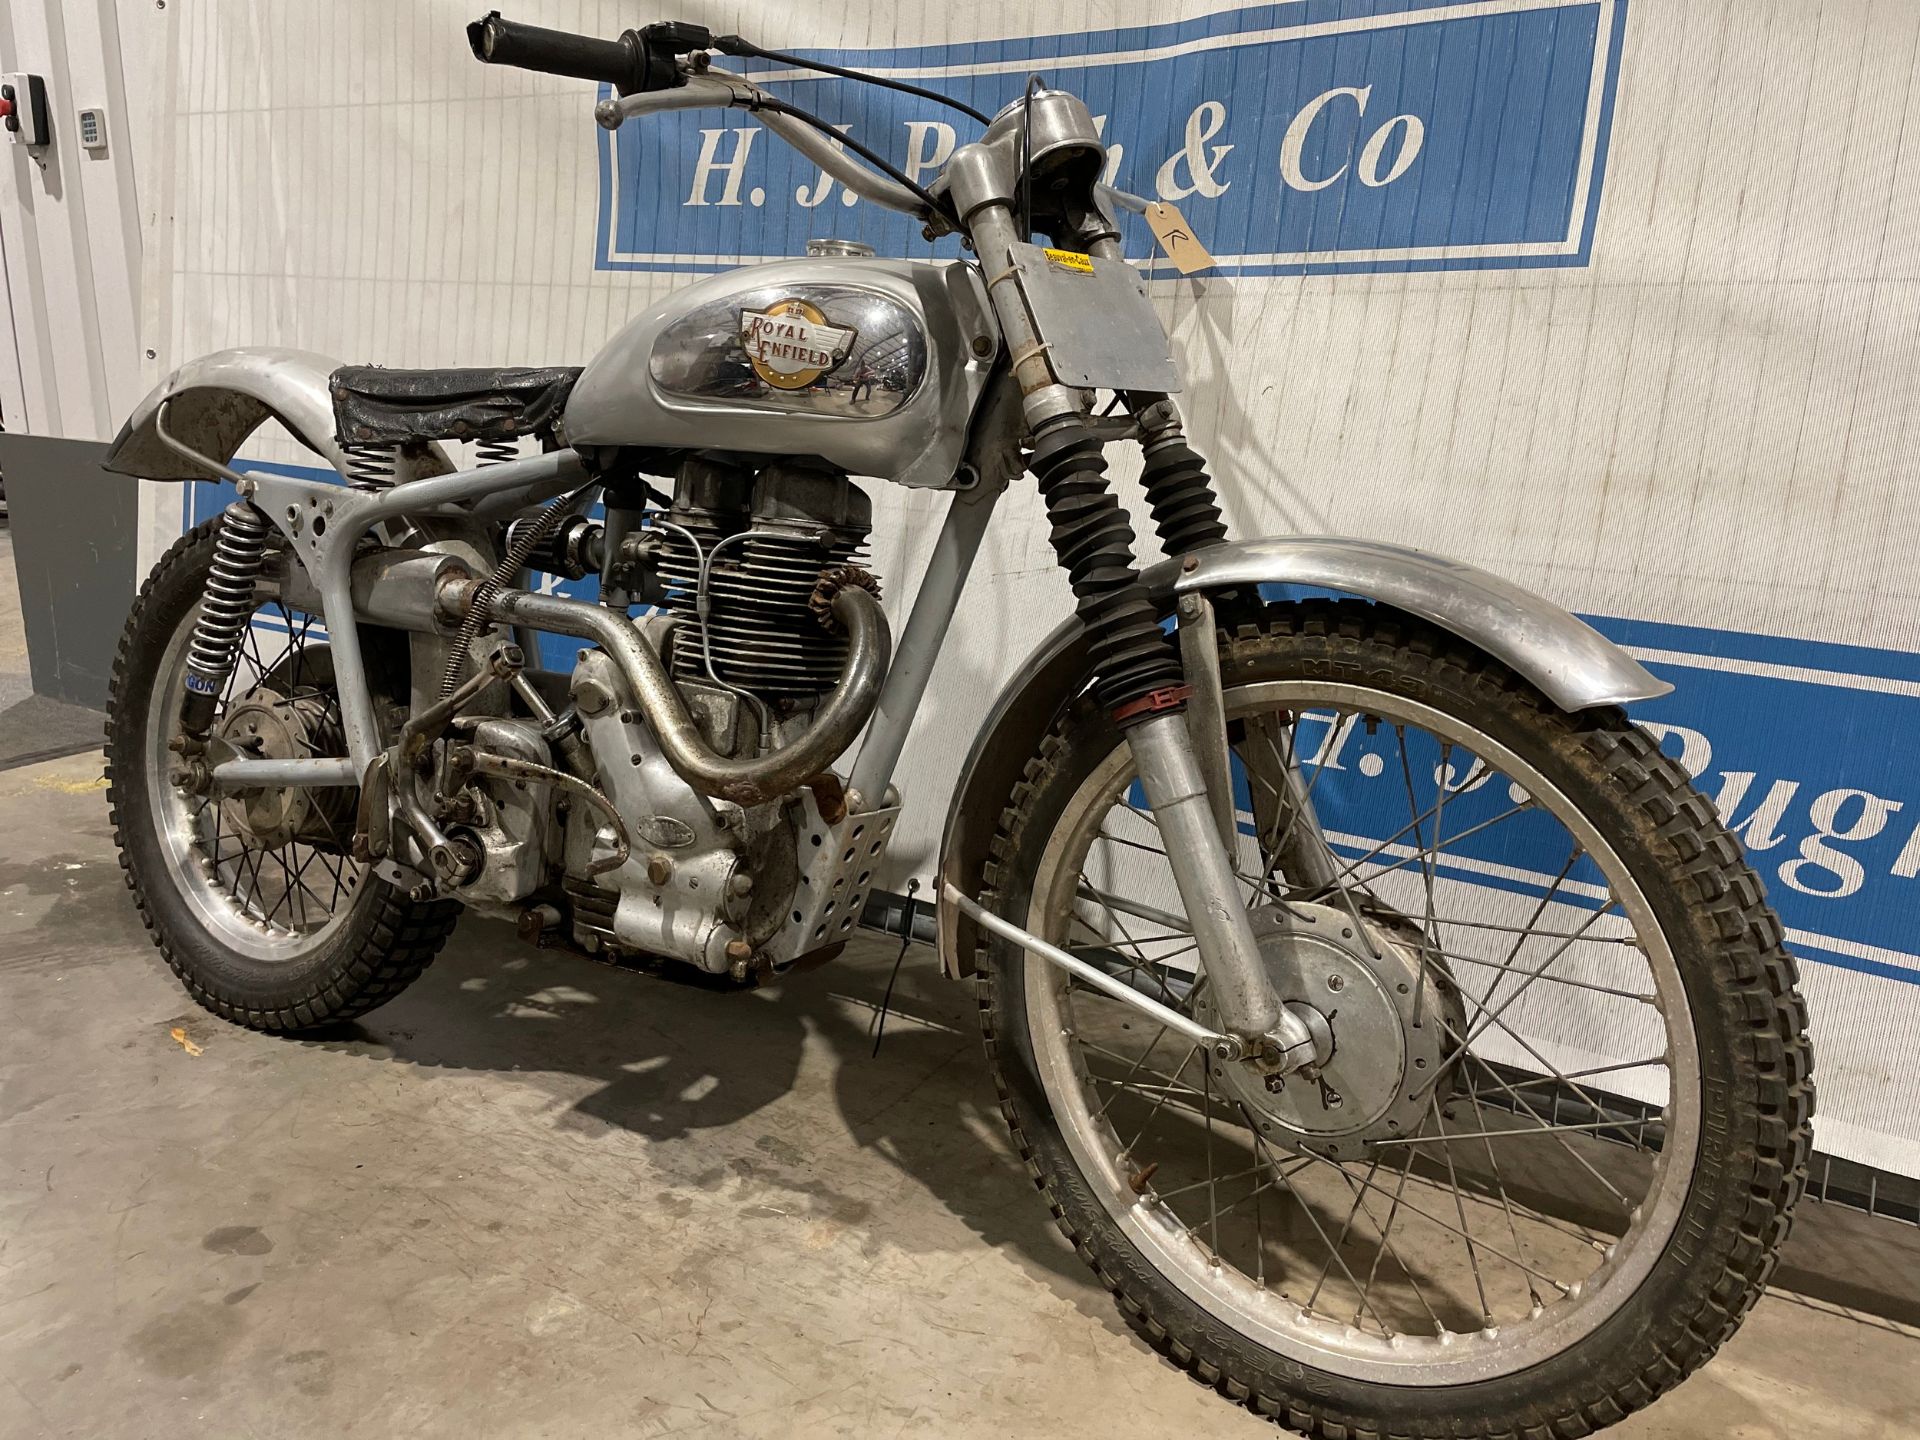 Royal Enfield 350cc motorcycle. 1959. Performs well. Reg 631 XVU. V5 - Image 5 of 16